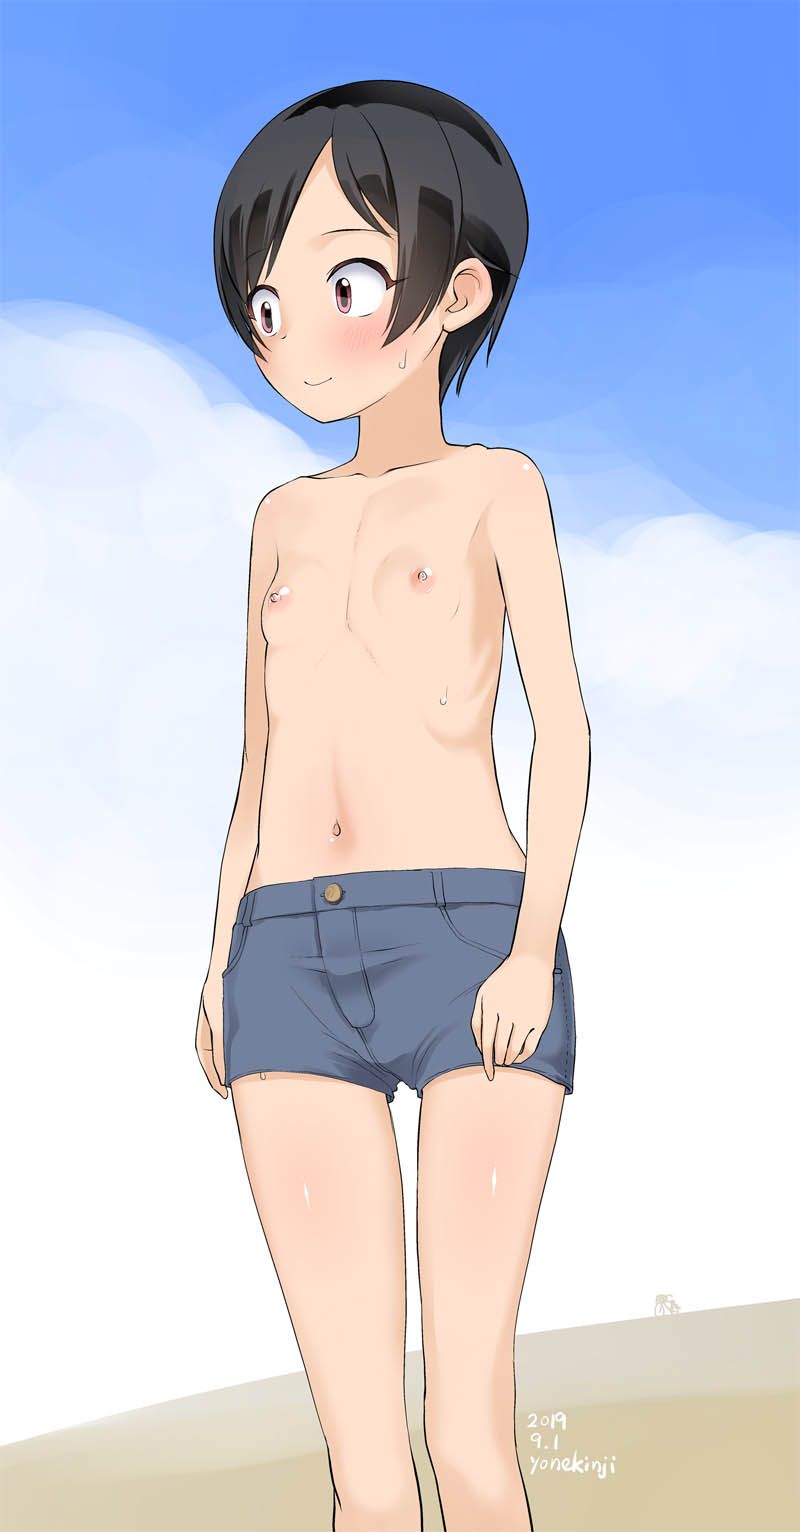 [TopLess Lori] erotic image of lori girl who looks tiny with topless on the top even though wearing skirts and pants! 7